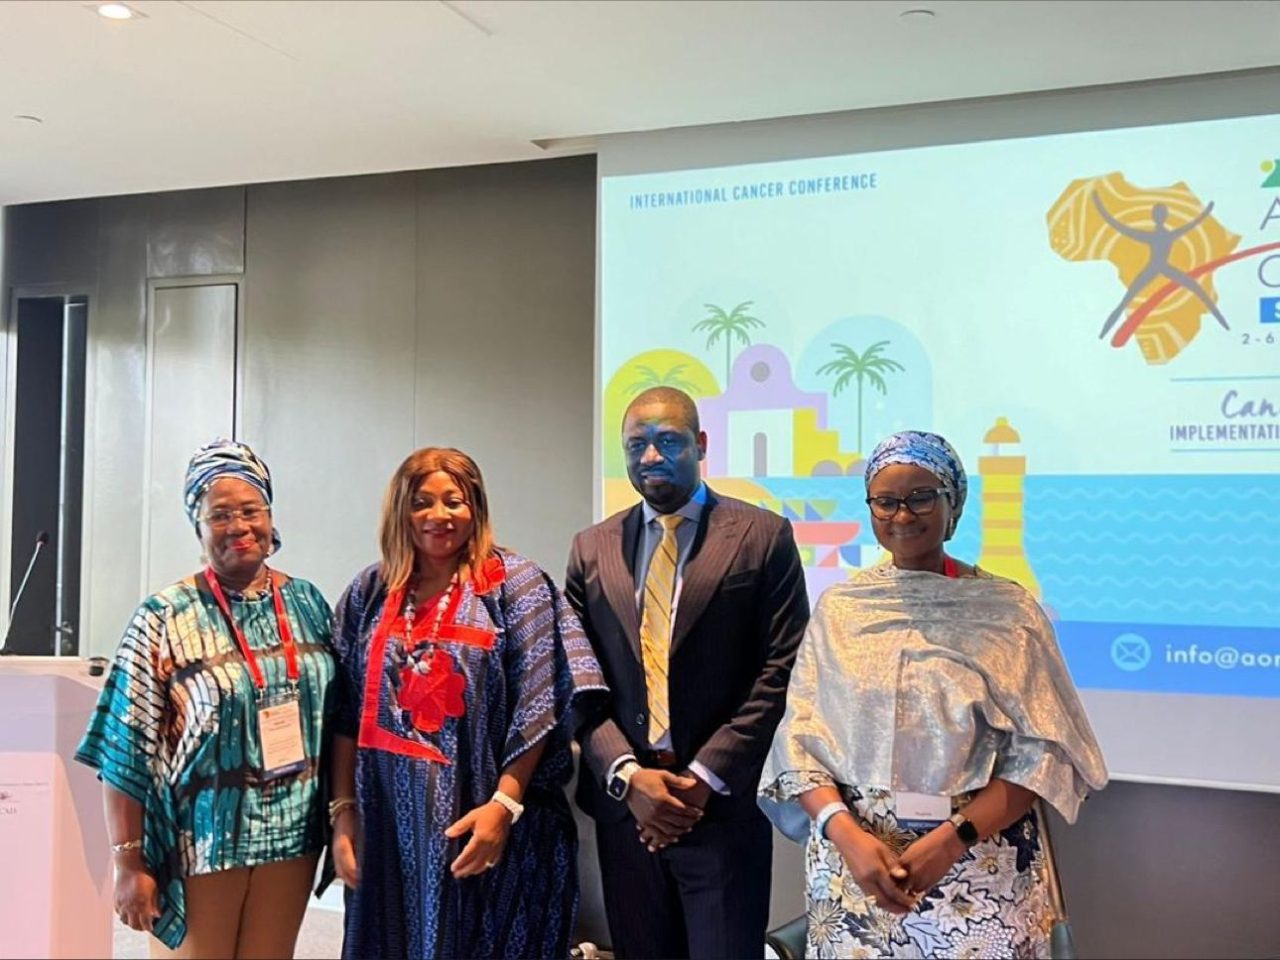 Zainab Shinkafi-Bagudu: As Abuja, joins City Cancer Challenge network, I joined other esteemed speakers to share the barriers in to improving cancer control at the CCan session during Aortic2023